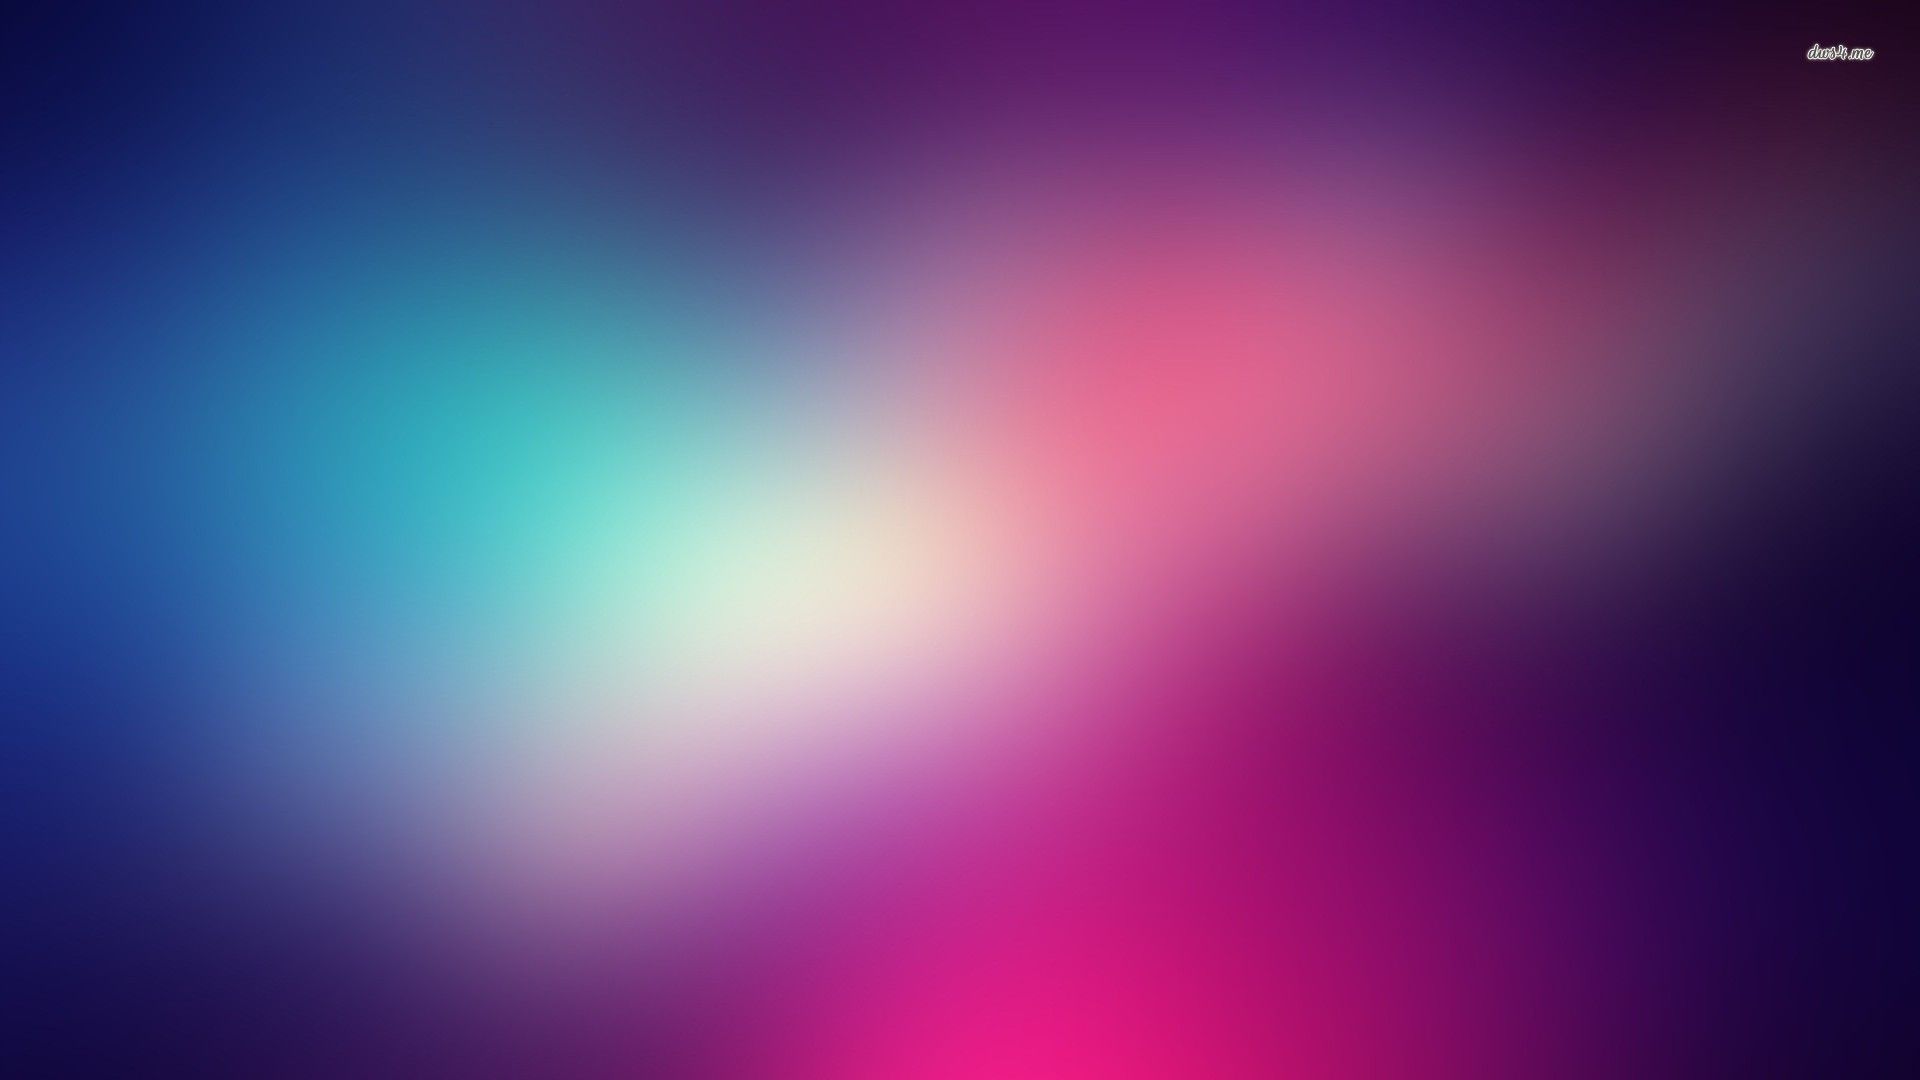 Multicolored blur wallpaper - Abstract wallpapers - #15454